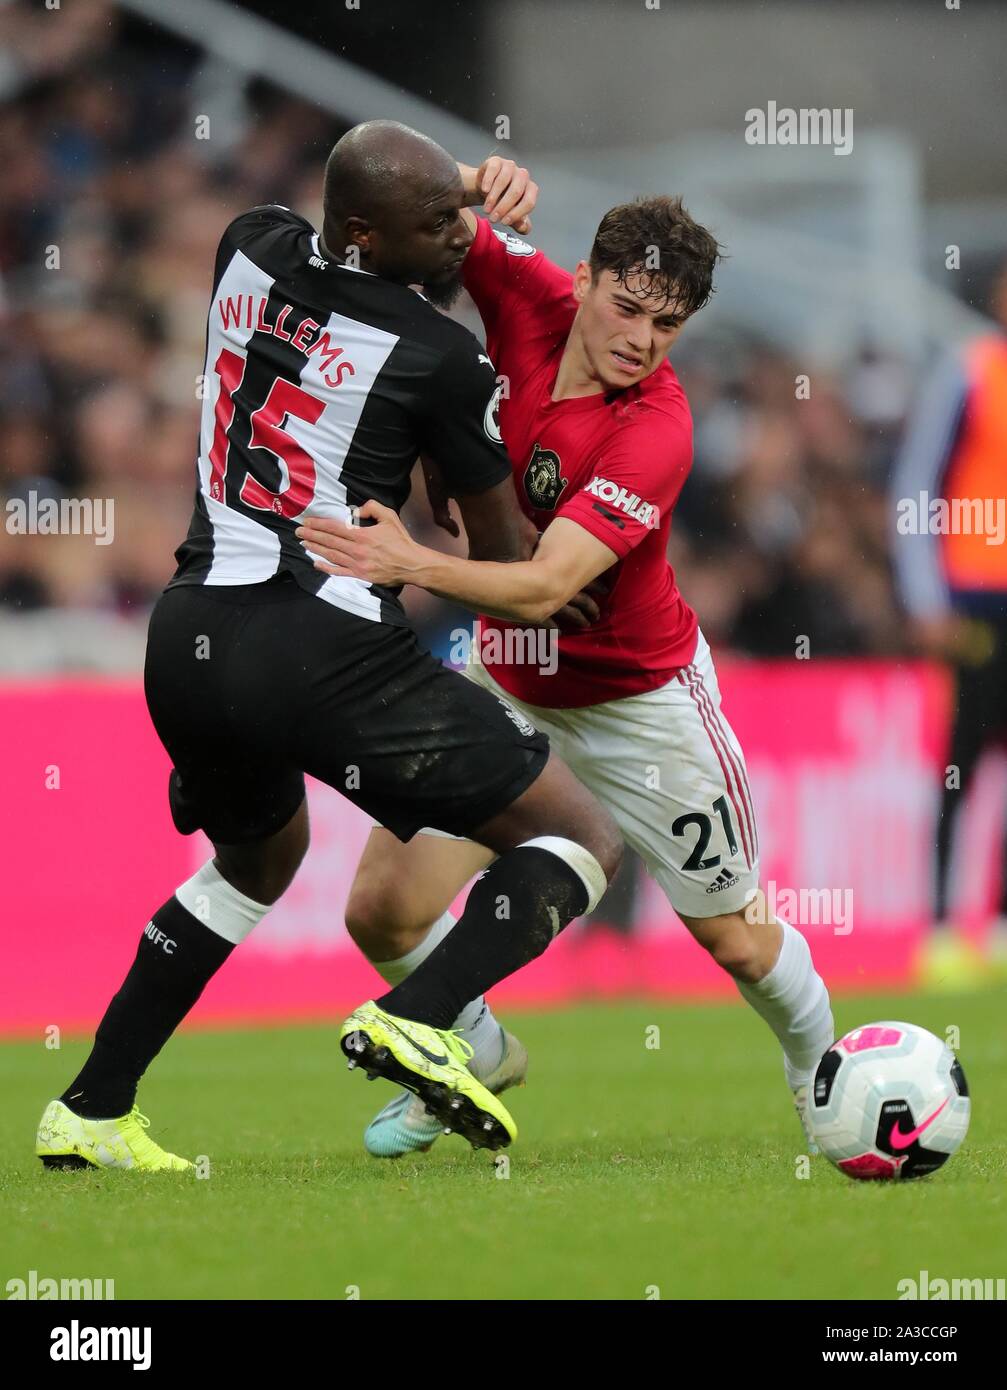 WILLEMS,JAMES, NEWCASTLE UNITED FC V MANCHESTER UNITED FC  PREMIER LEAGUE, 2019 Stock Photo